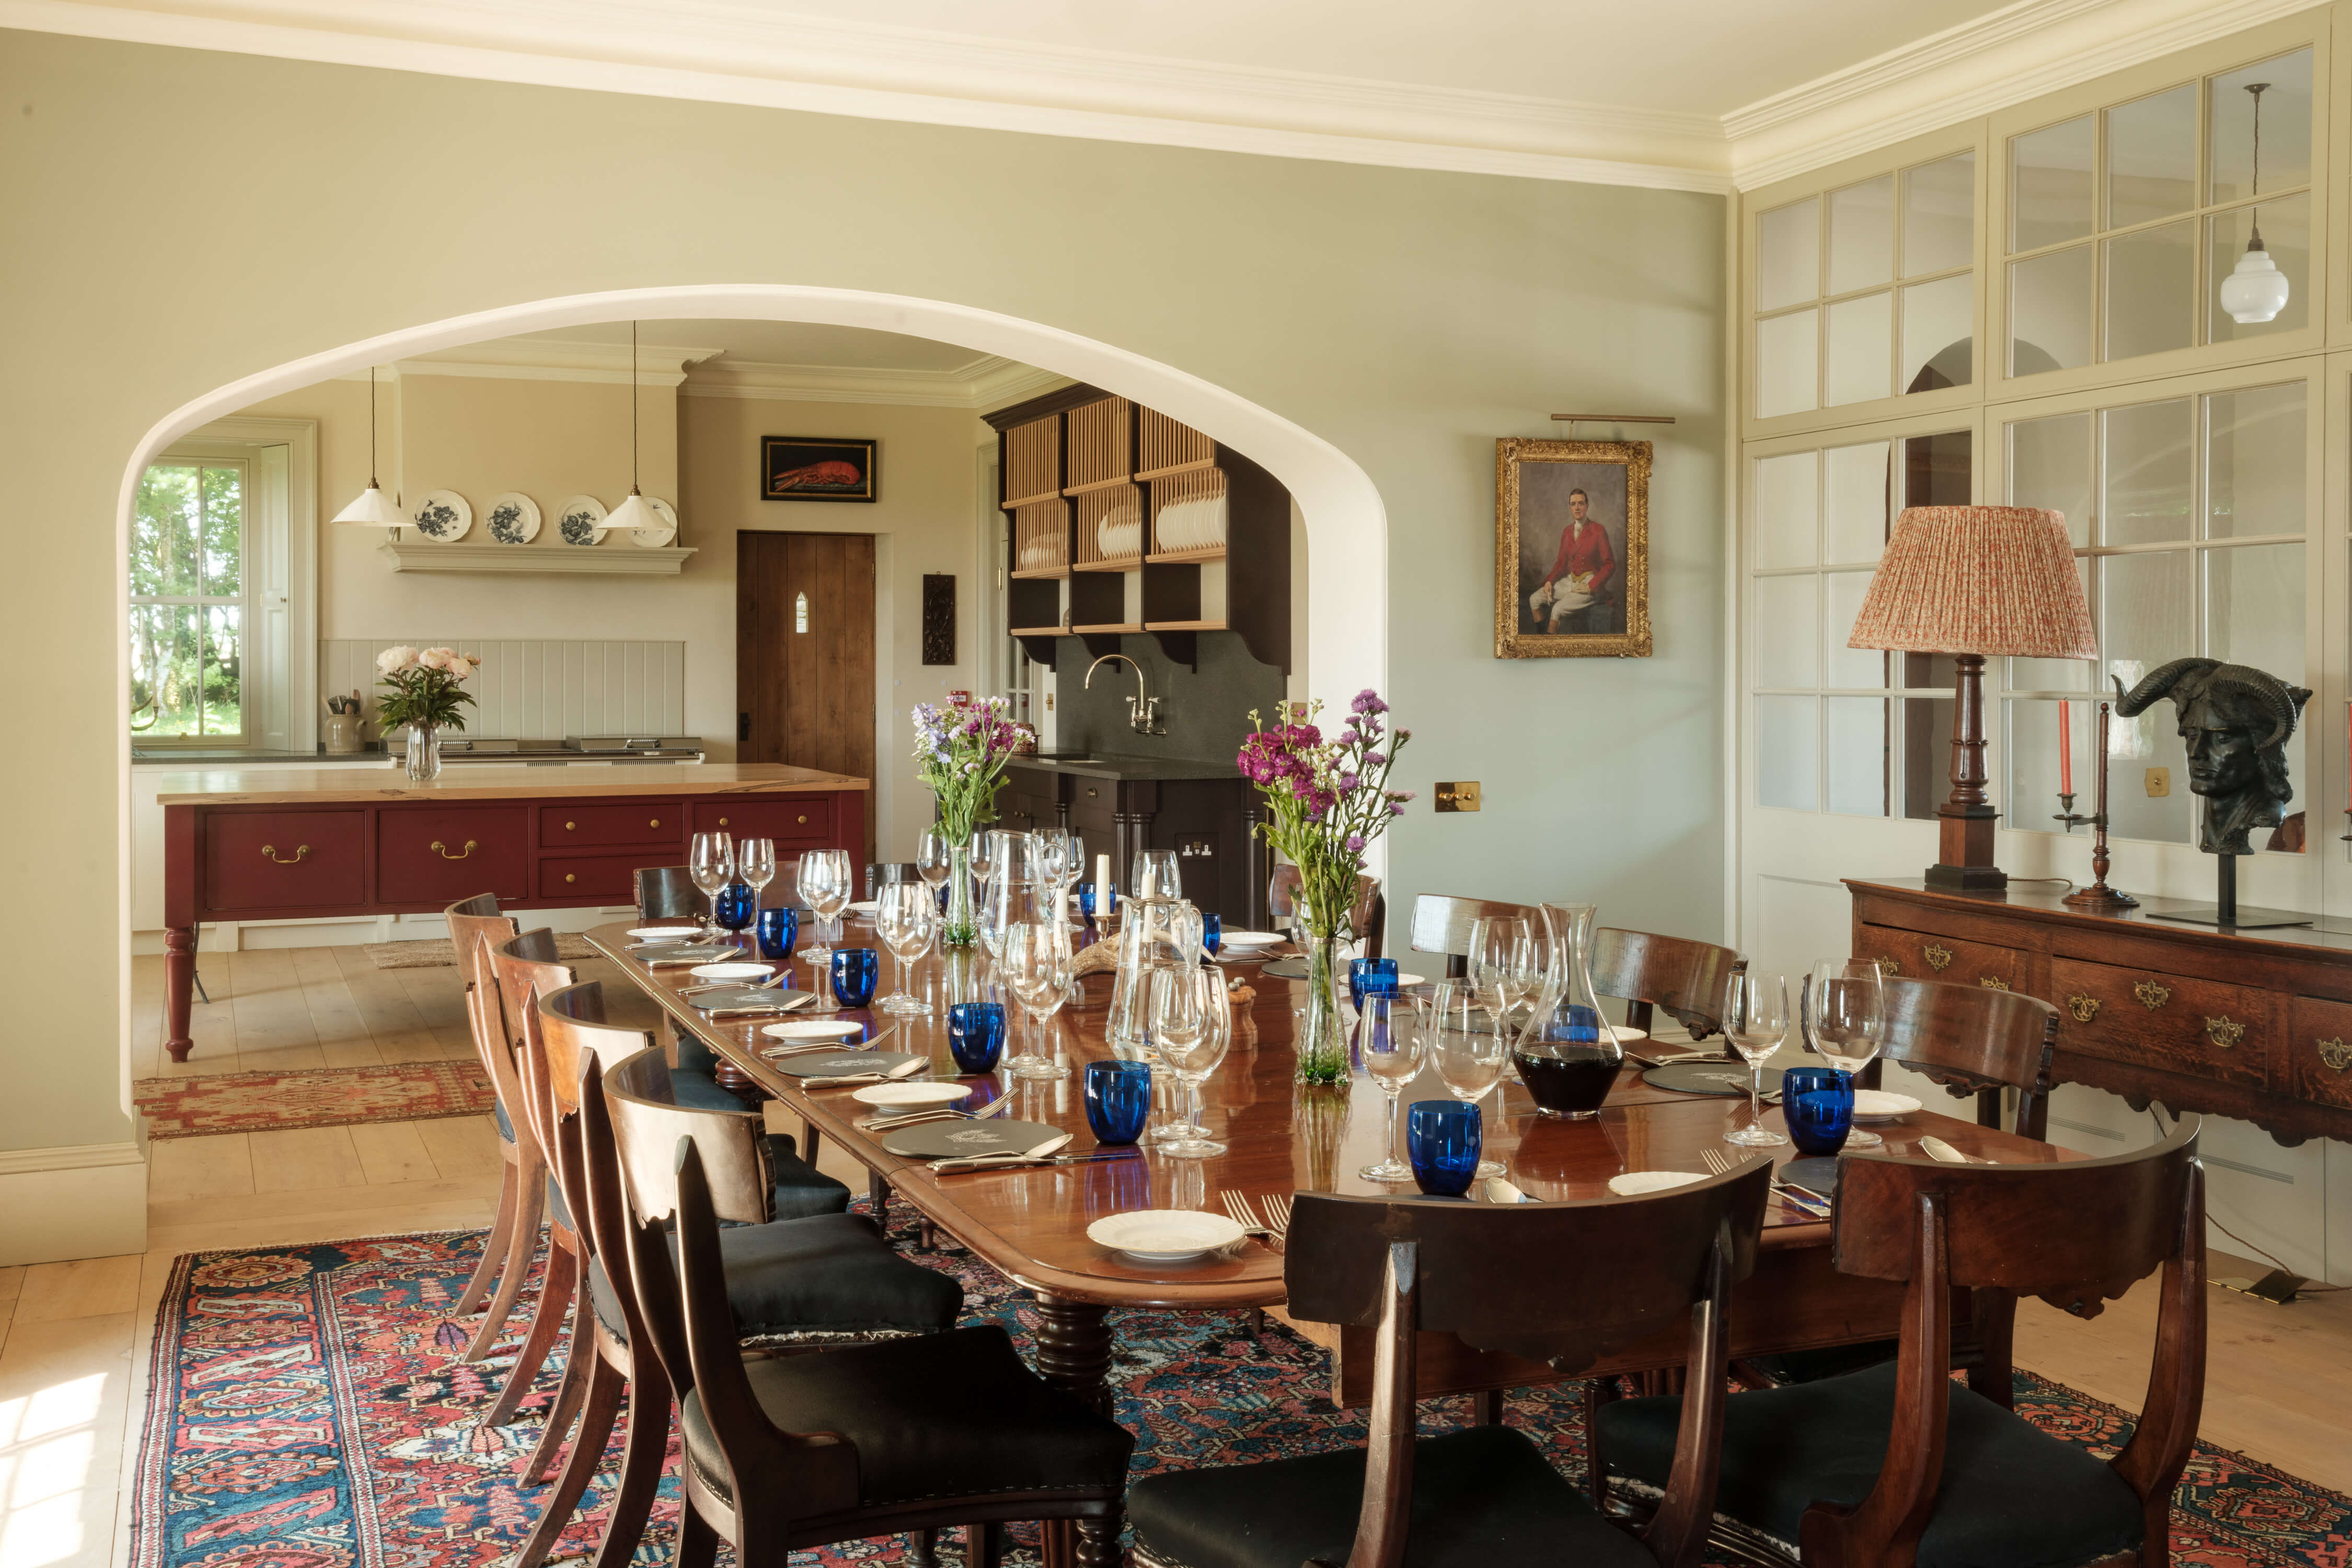 Duredon - formal dining for 16 guests